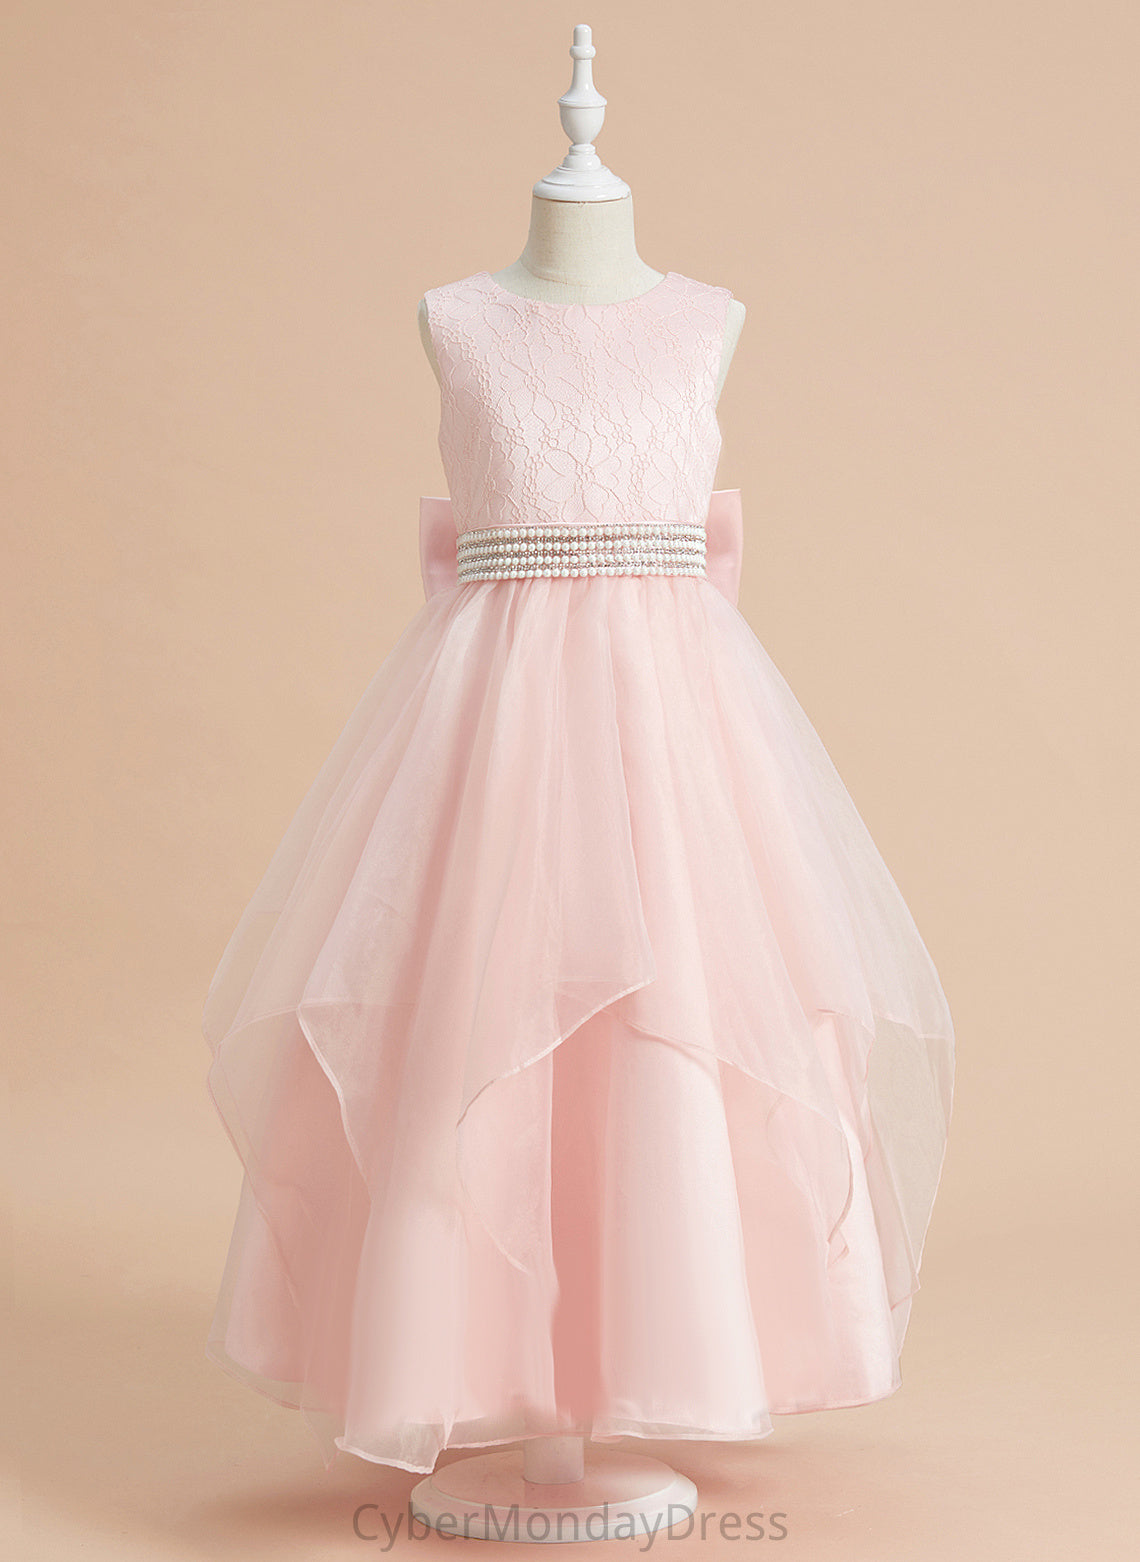 Beading/Bow(s) Dress Flower Girl Dresses Quintina Ankle-length Organza/Lace Ball-Gown/Princess Neck Flower - Girl Sleeveless Scoop With